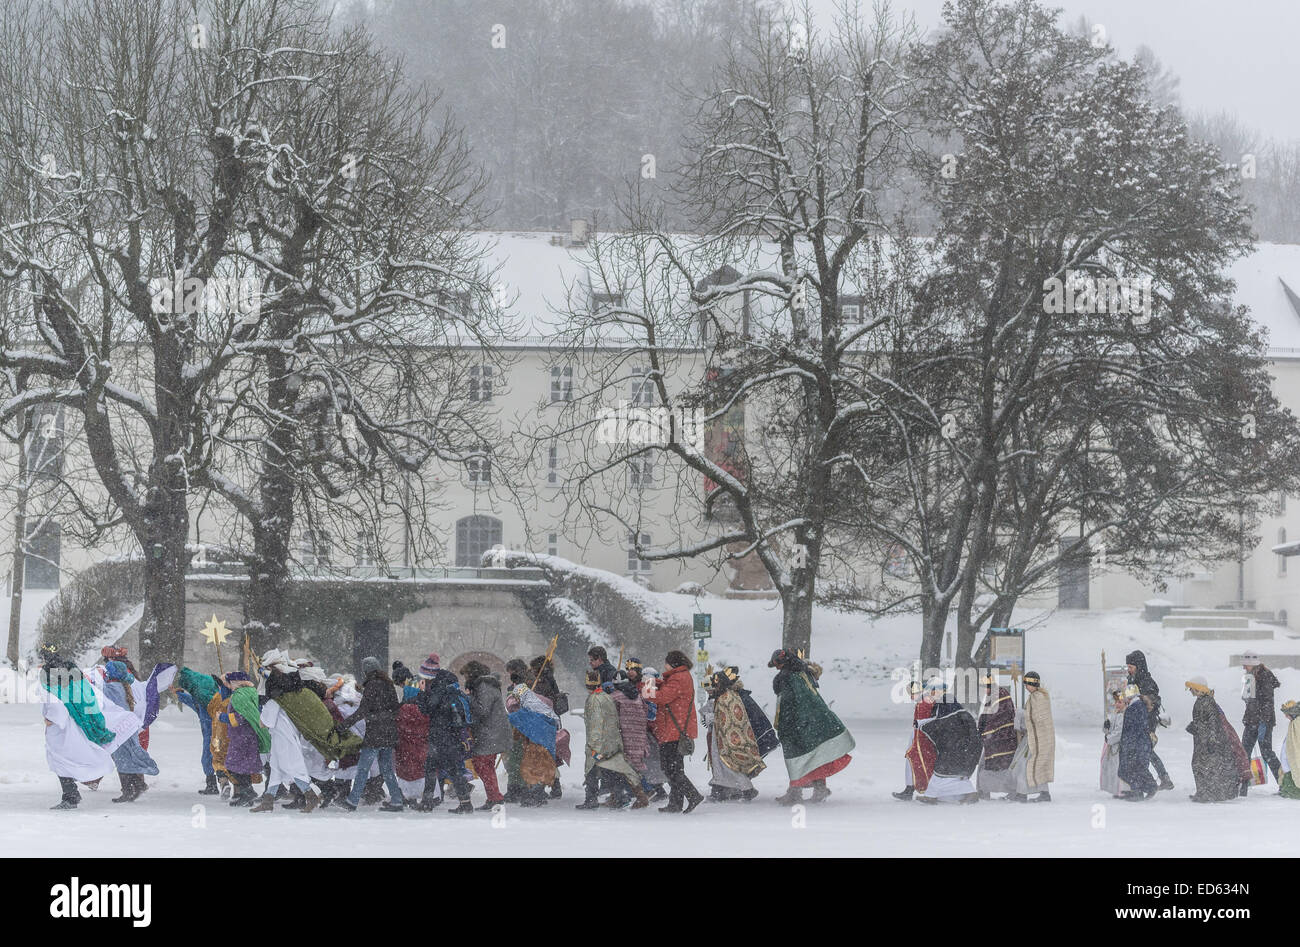 A parade of 'Sternsinger' walks amid heavy snowfall toward the Klosterkirche Fuerstenfeld (Church of St. Mary's Ascension) for a service in Fuerstenfeldbruck, Germany, 29 December 2014. The 'Sternsinger' (also known as 'Epiphany singers') stage singing processions, often holding a movable star, meant to commemorate the arrival of the Biblical Magi. The event in Furstenfeldbruck marked the start of 'Sternsinger' events. PHOTO: NICOLAS ARMER/dpa Stock Photo